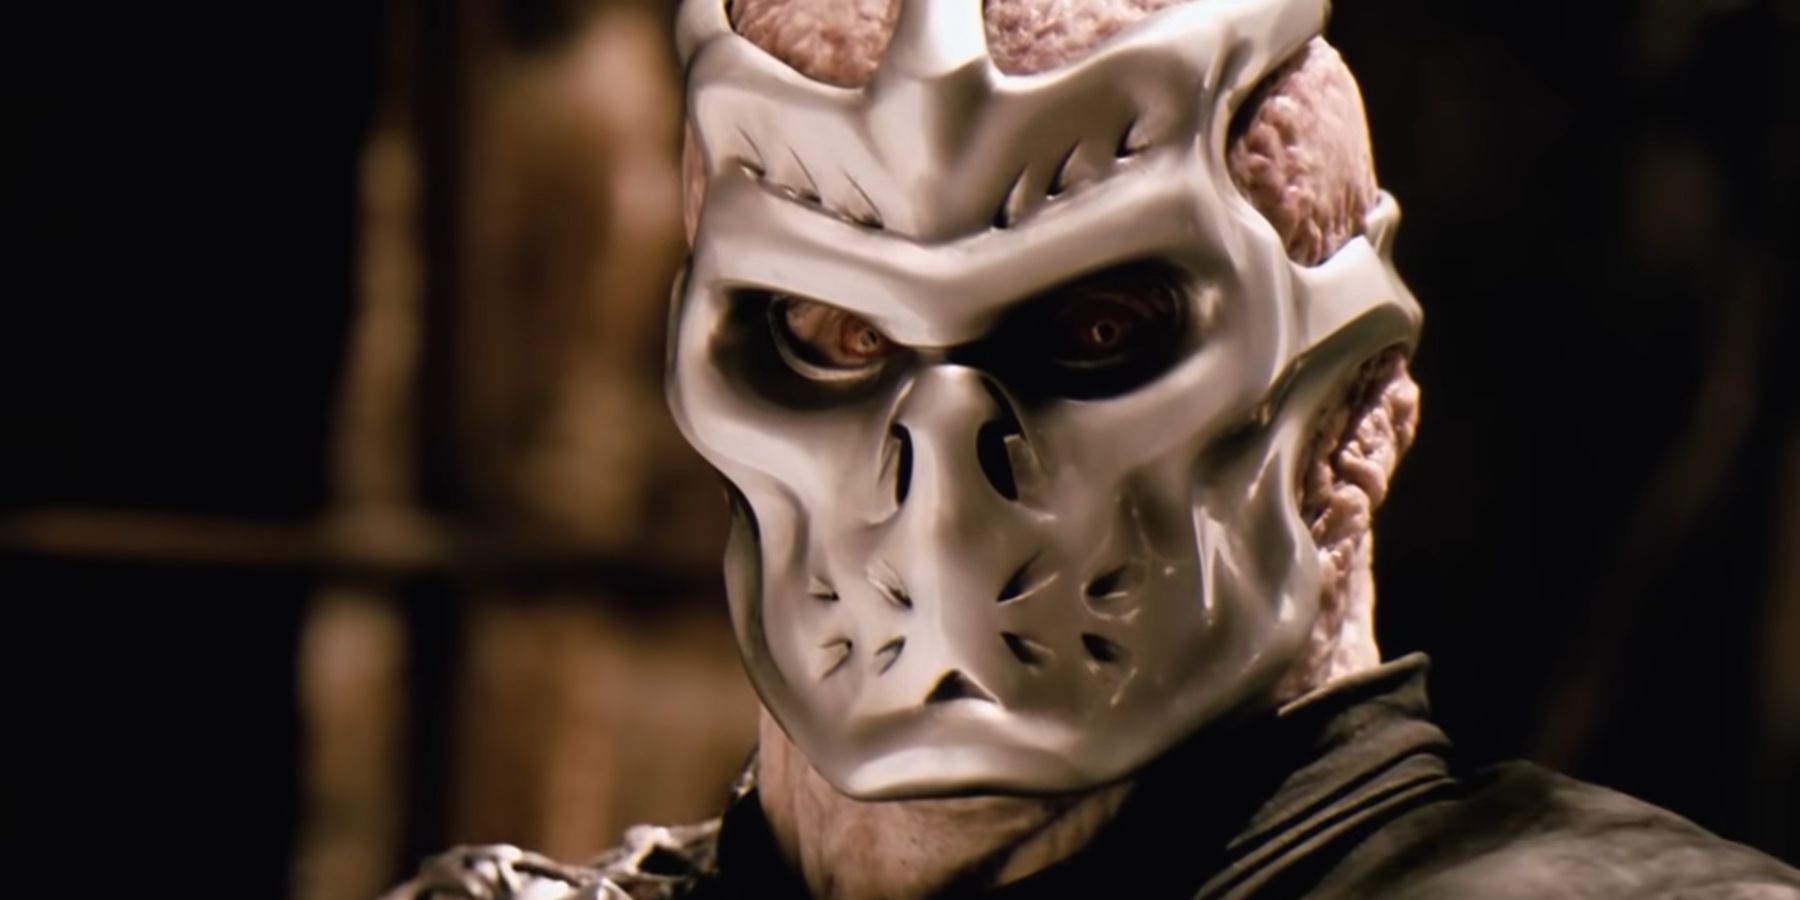 Uber Jason in the virtual reality version of Camp Crystal Lake in Jason X